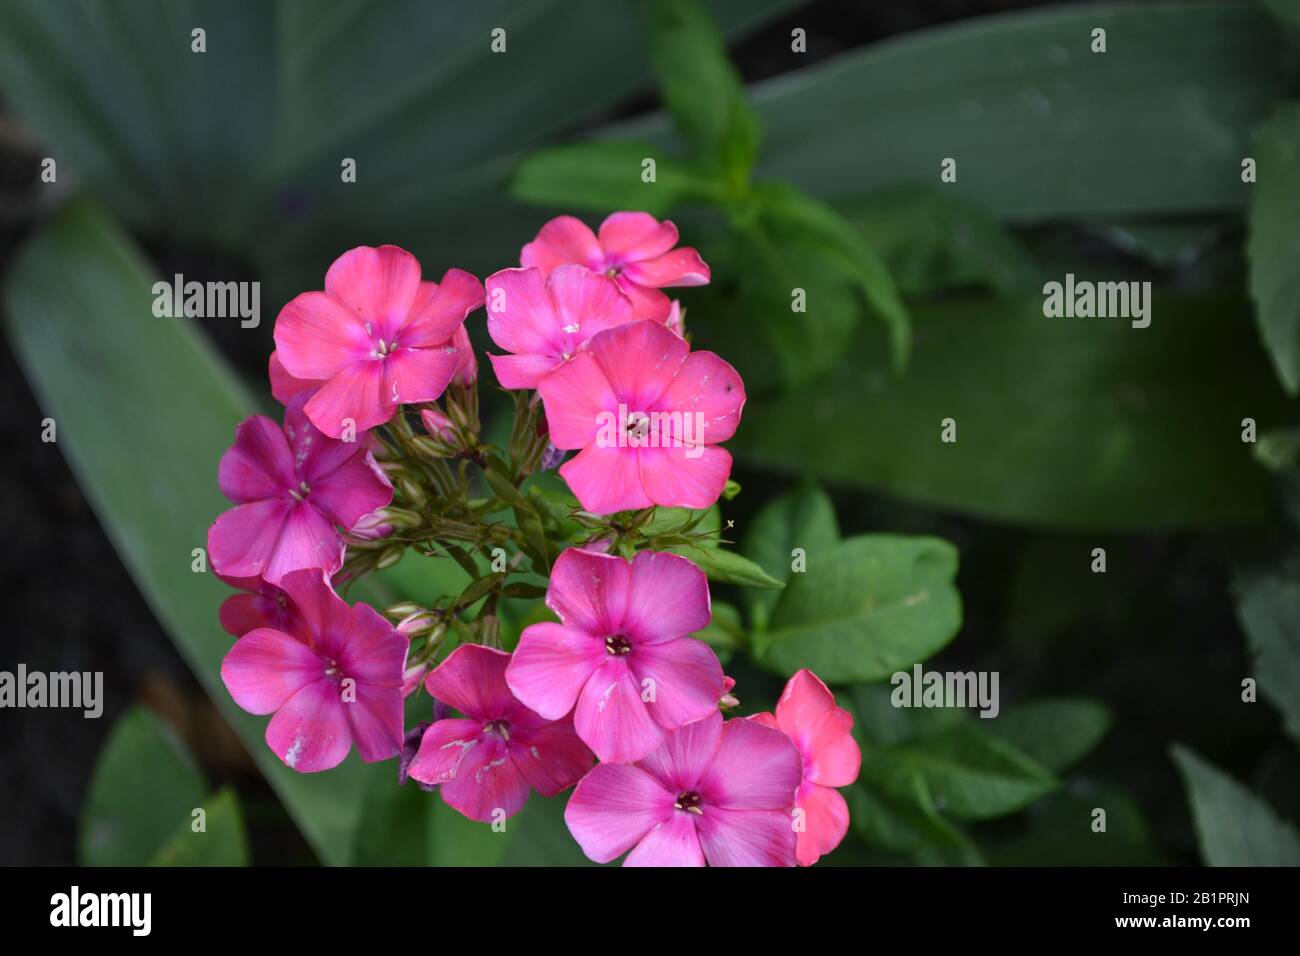 Phlox. Polemoniaceae. Growing flowers. Flowerbed. Garden. Floriculture. Pink inflorescence. Beautiful flowers. Green leaves. High bushes. Summer day. Stock Photo